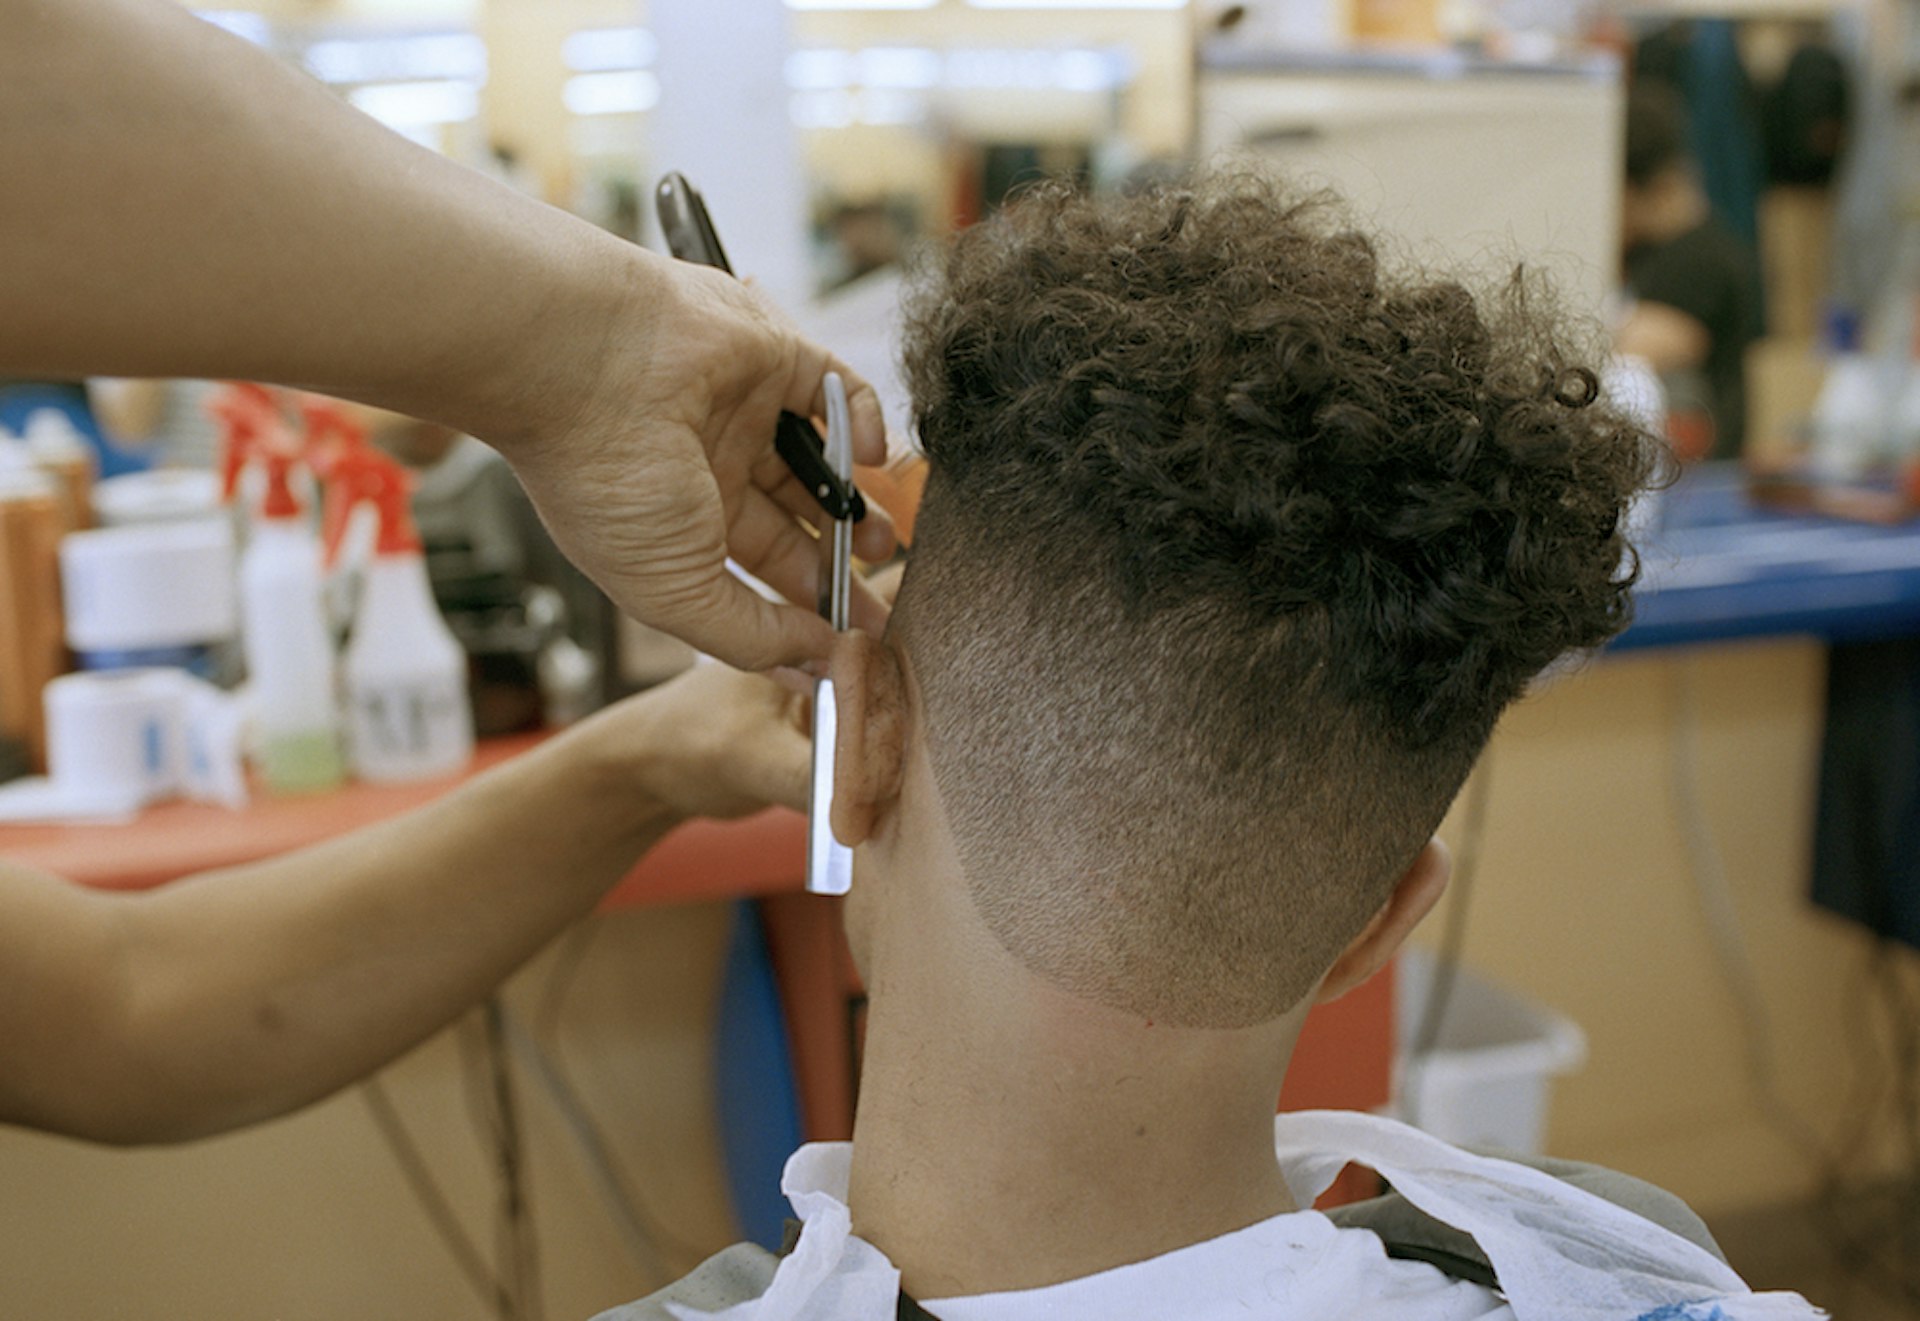 Ahmed Alzandhani  gets a medium skin fade the day before a soccer match at a Dominican barbershop in the Flatbush neighborhood of Brooklyn, New York.